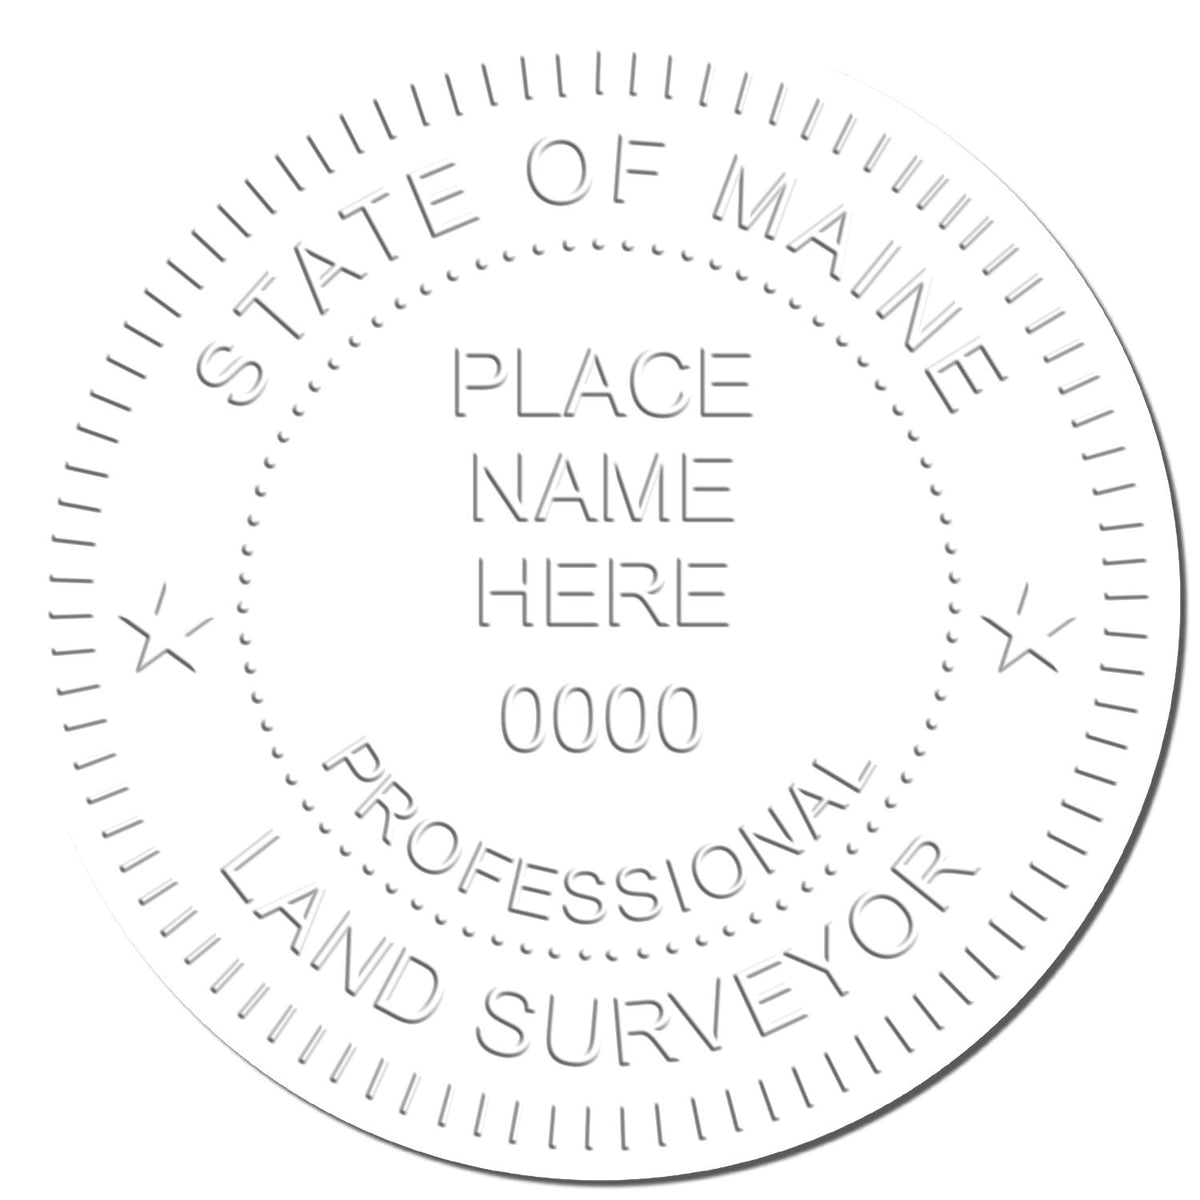 This paper is stamped with a sample imprint of the Maine Desk Surveyor Seal Embosser, signifying its quality and reliability.